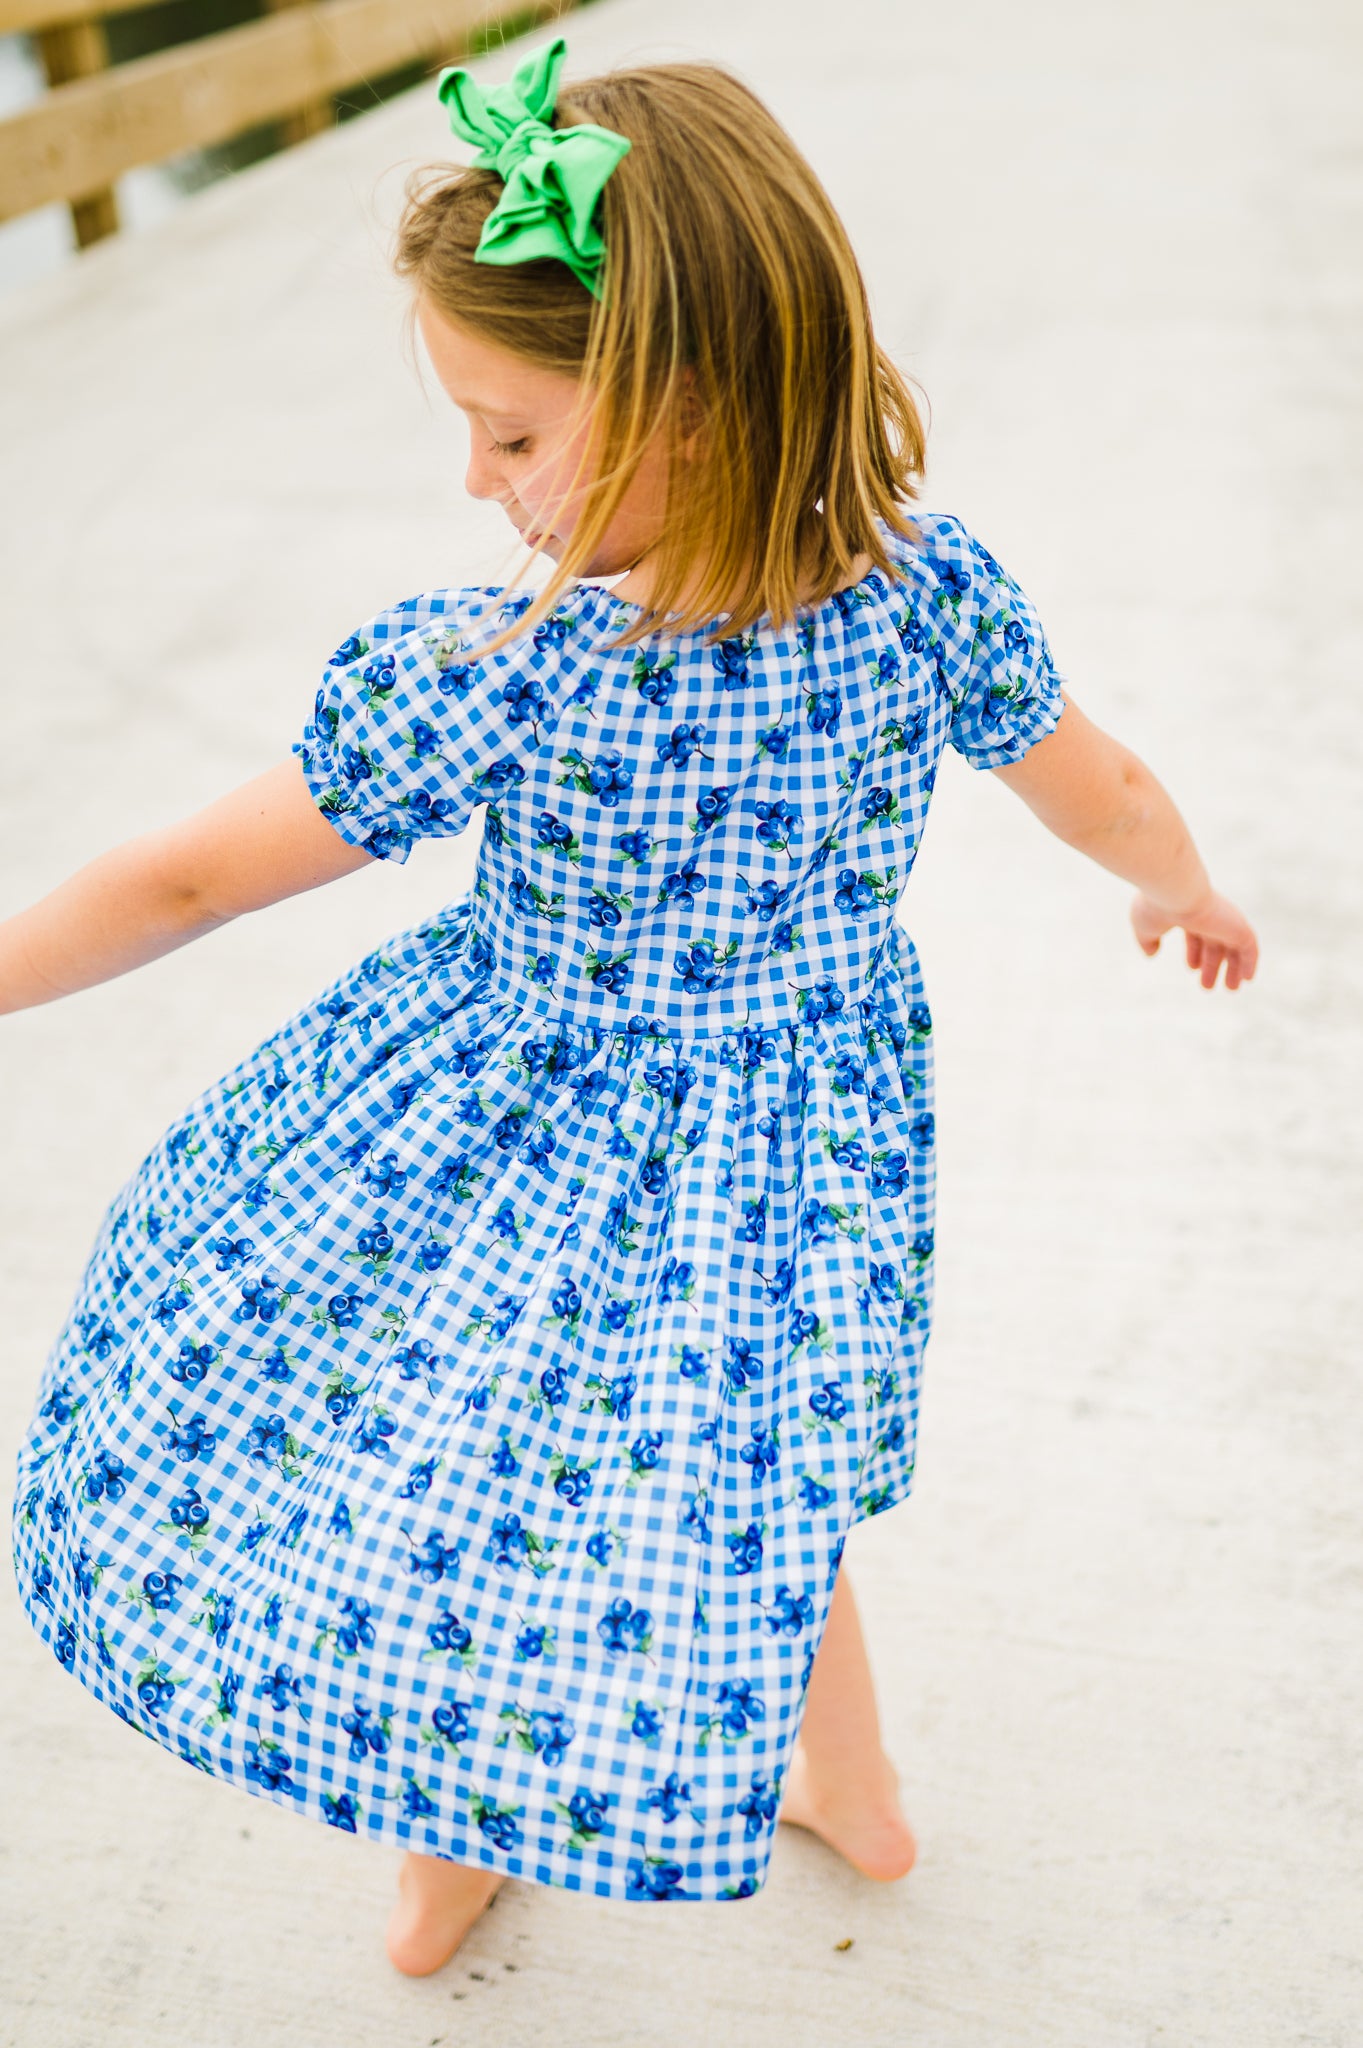 Blueberry Picnic Peasant Twirl Dress (Ships in 2 Weeks)